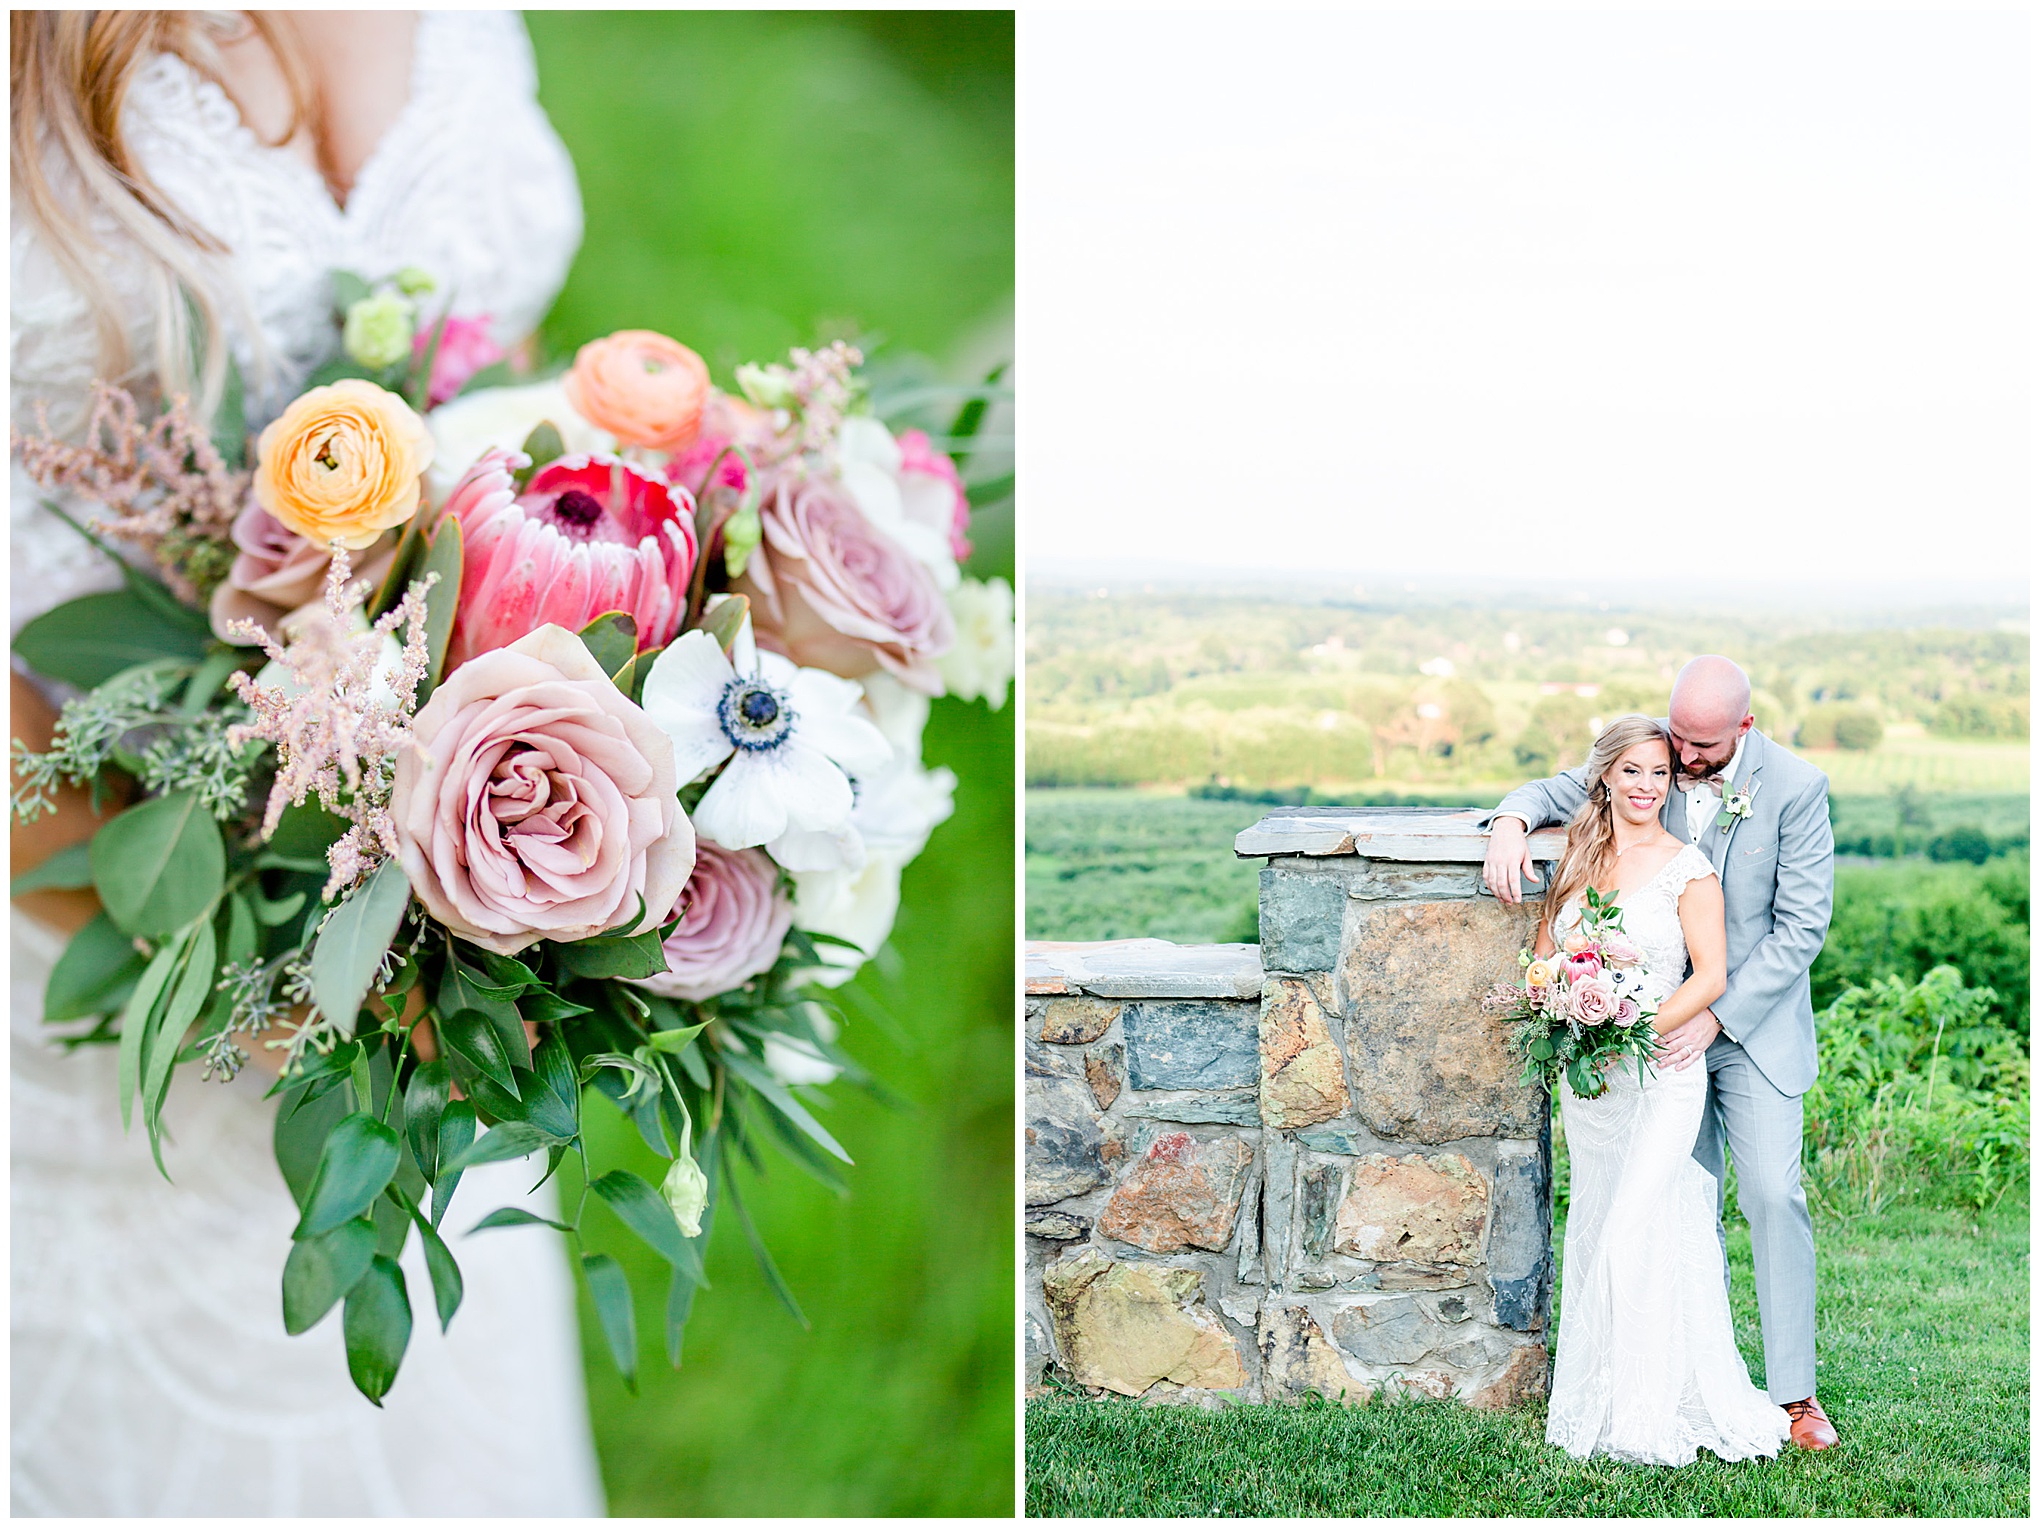 romantic Bluemont Vineyard wedding, Bluemont Vineyard, romantic wedding colors, Loudoun County wedding, Loudoun County wedding photographer, Loudoun County wedding venues, non-denominational wedding ceremony, Rachel E.H. Photography, Virginia wedding, rural wedding, rustic wedding, romantic wedding, romantic aesthetic, outdoor wedding, portraits with a view, newlywed portraits, Bend in the River Farms bridal bouquet